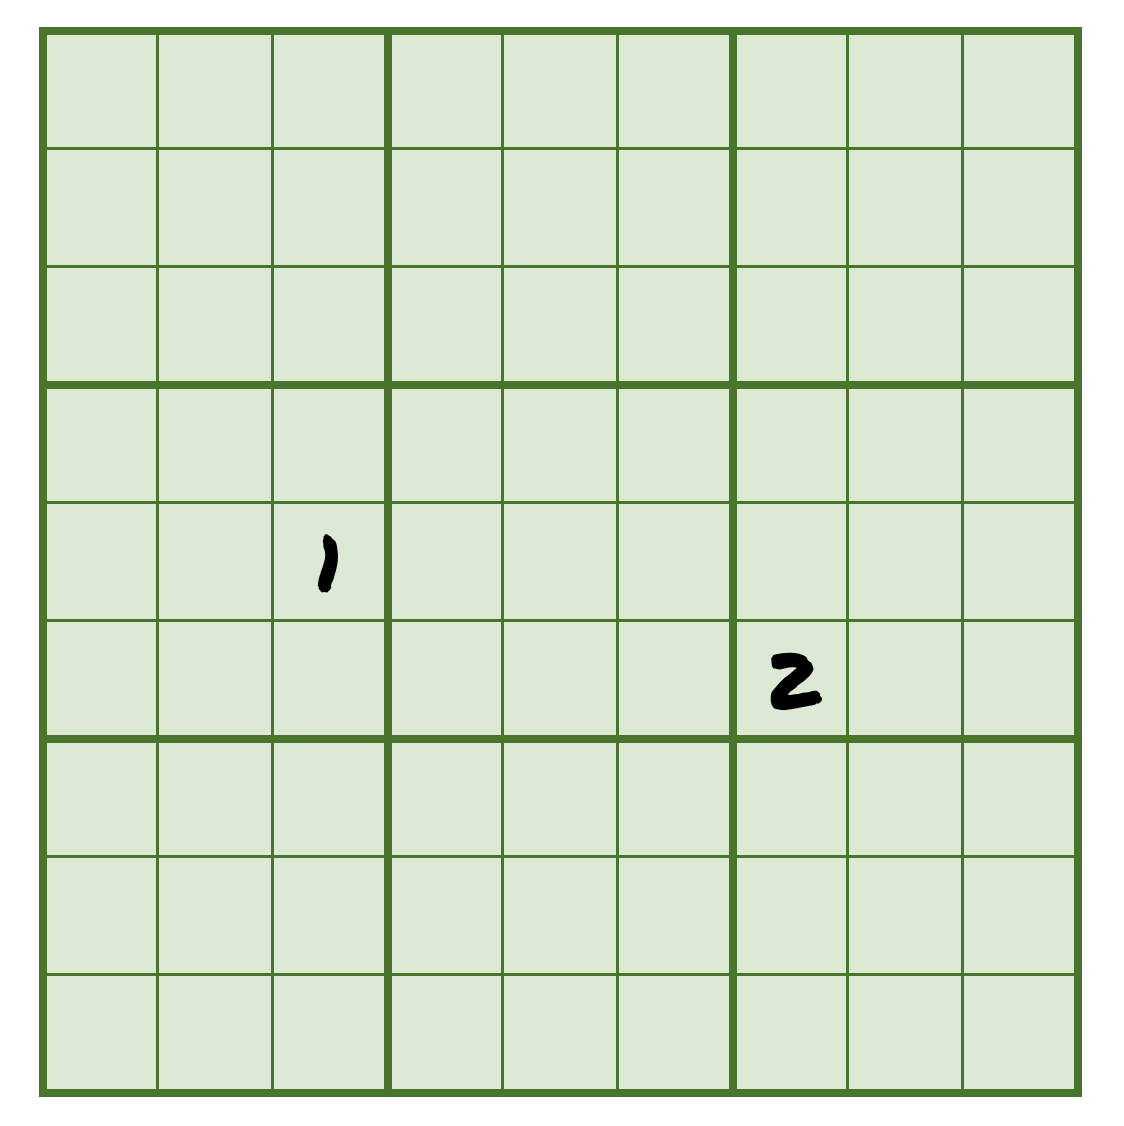 an empty green sudoku grid shows a single 1 and a single 2 filled in